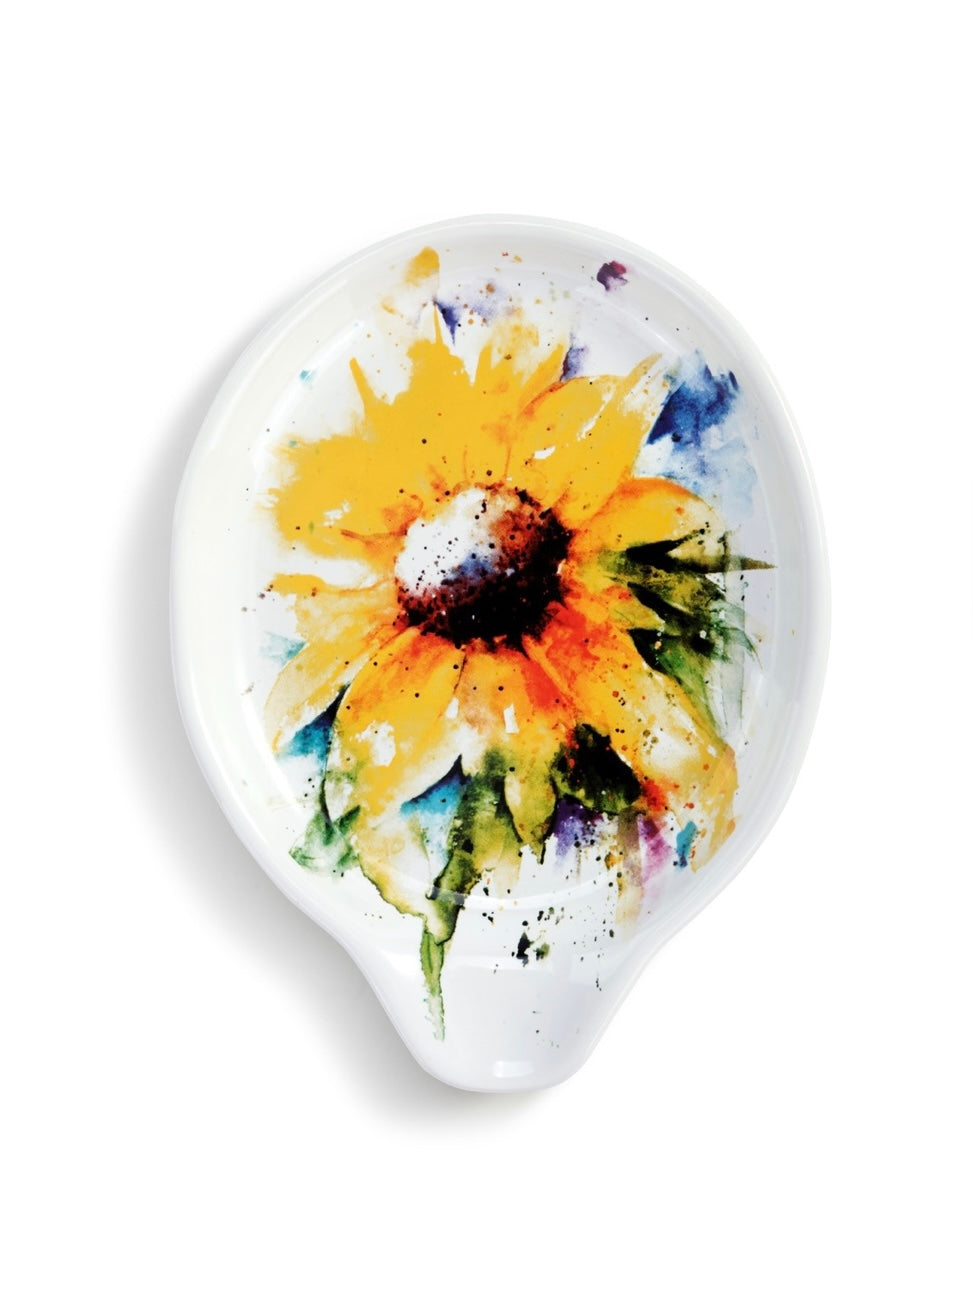 Sunflower Oval Spoon Rest